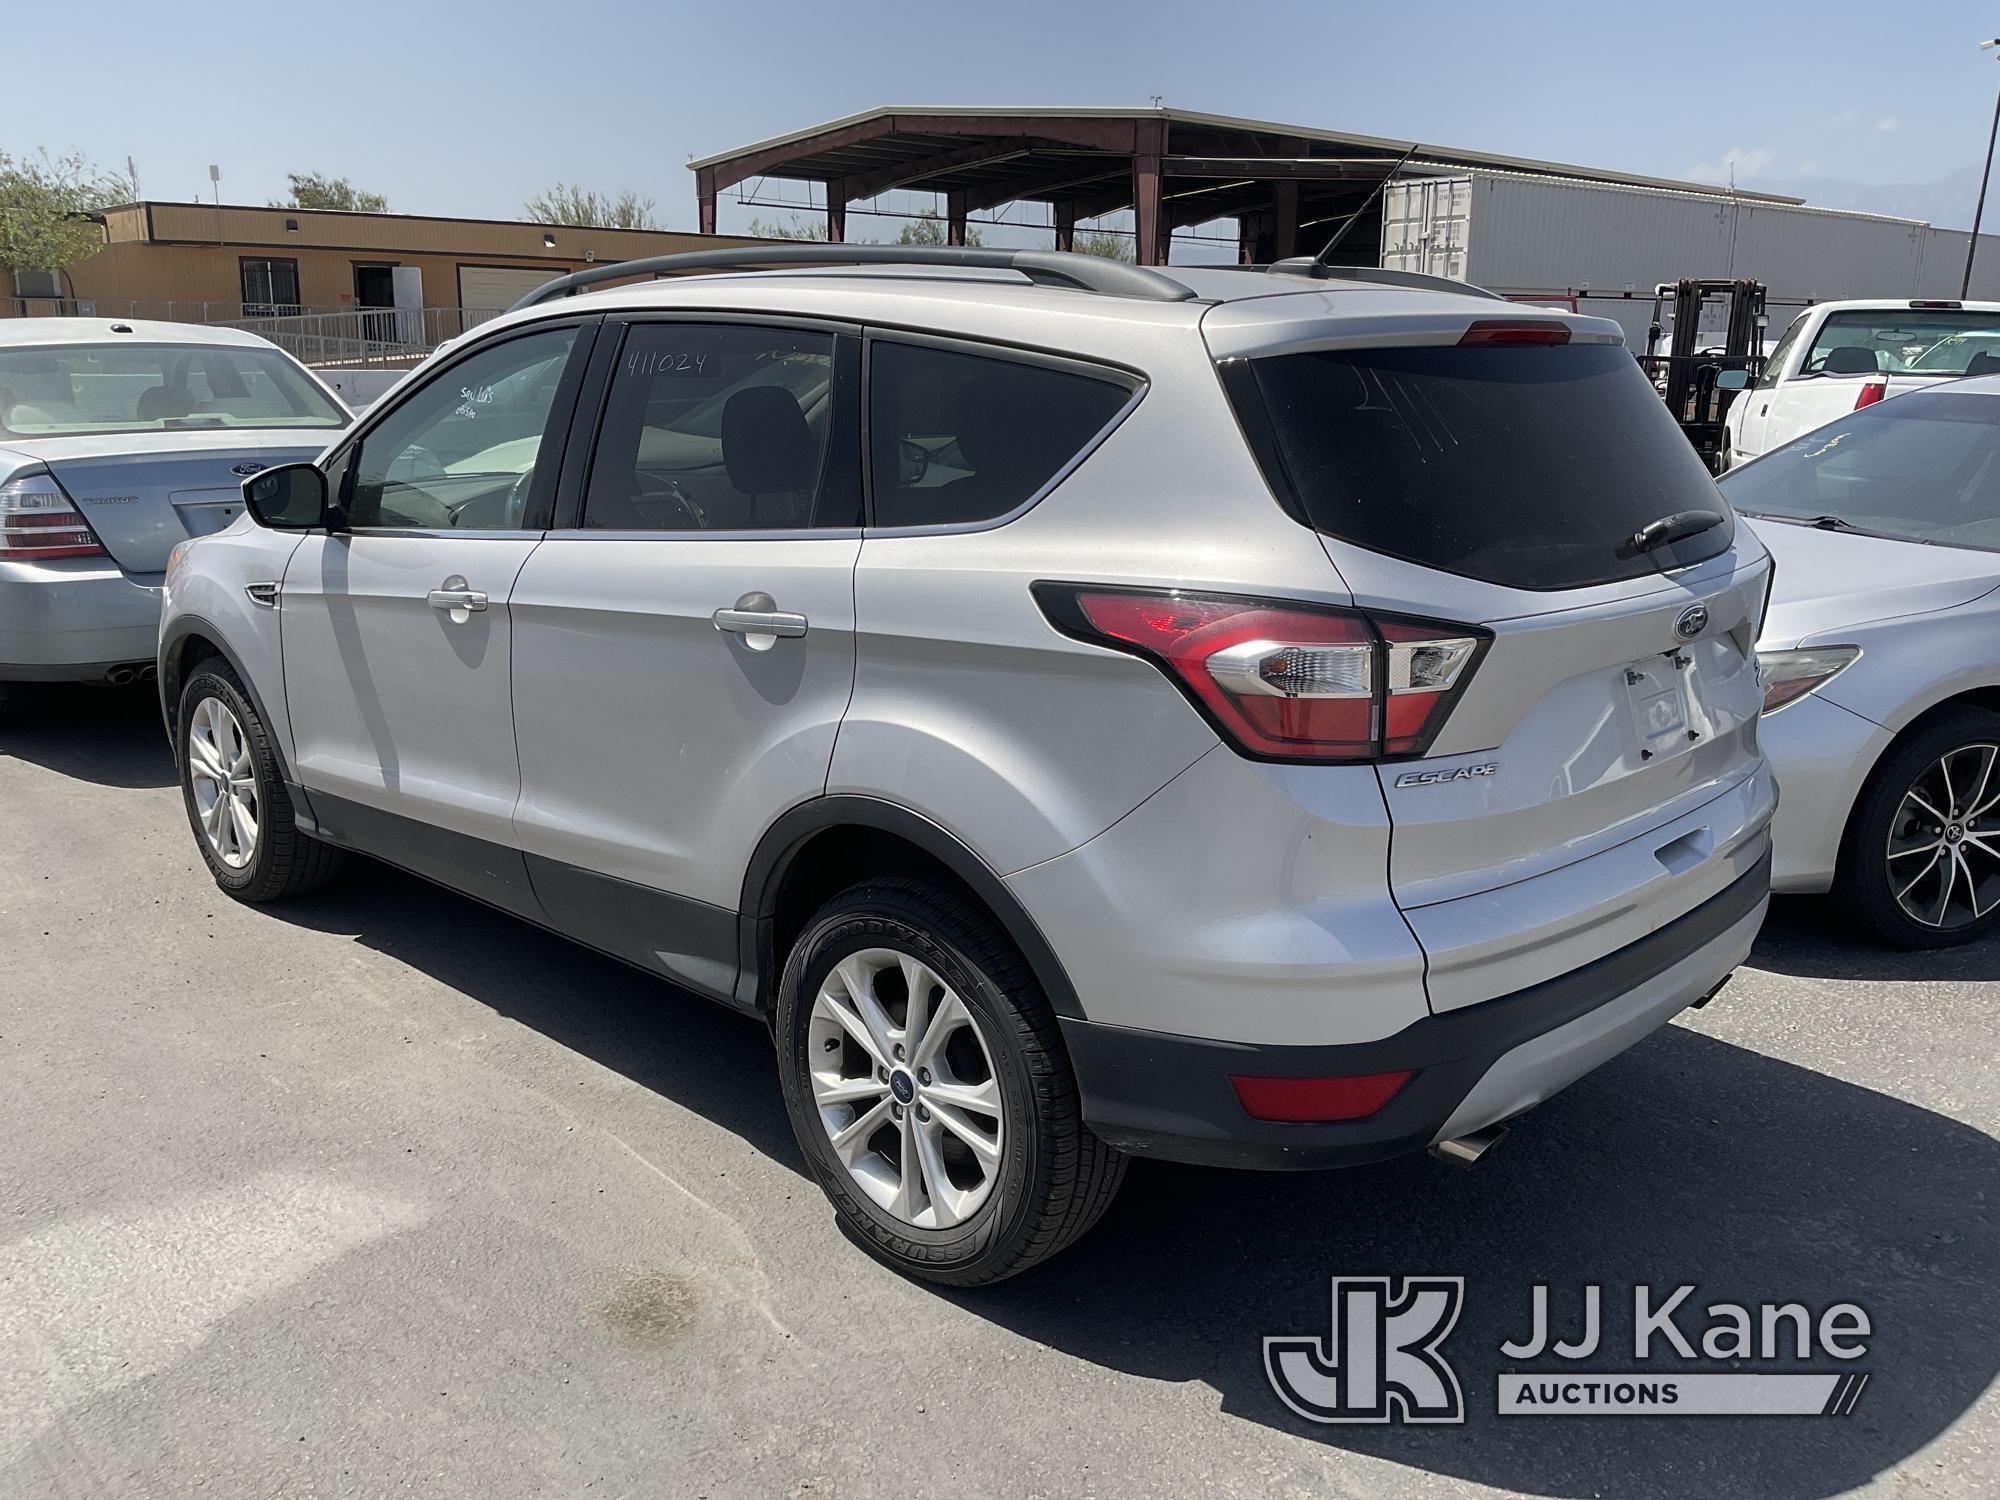 (Jurupa Valley, CA) 2018 Ford Escape 4x4 Sport Utility Vehicle Runs, Bad Transmission, Must Be Towed